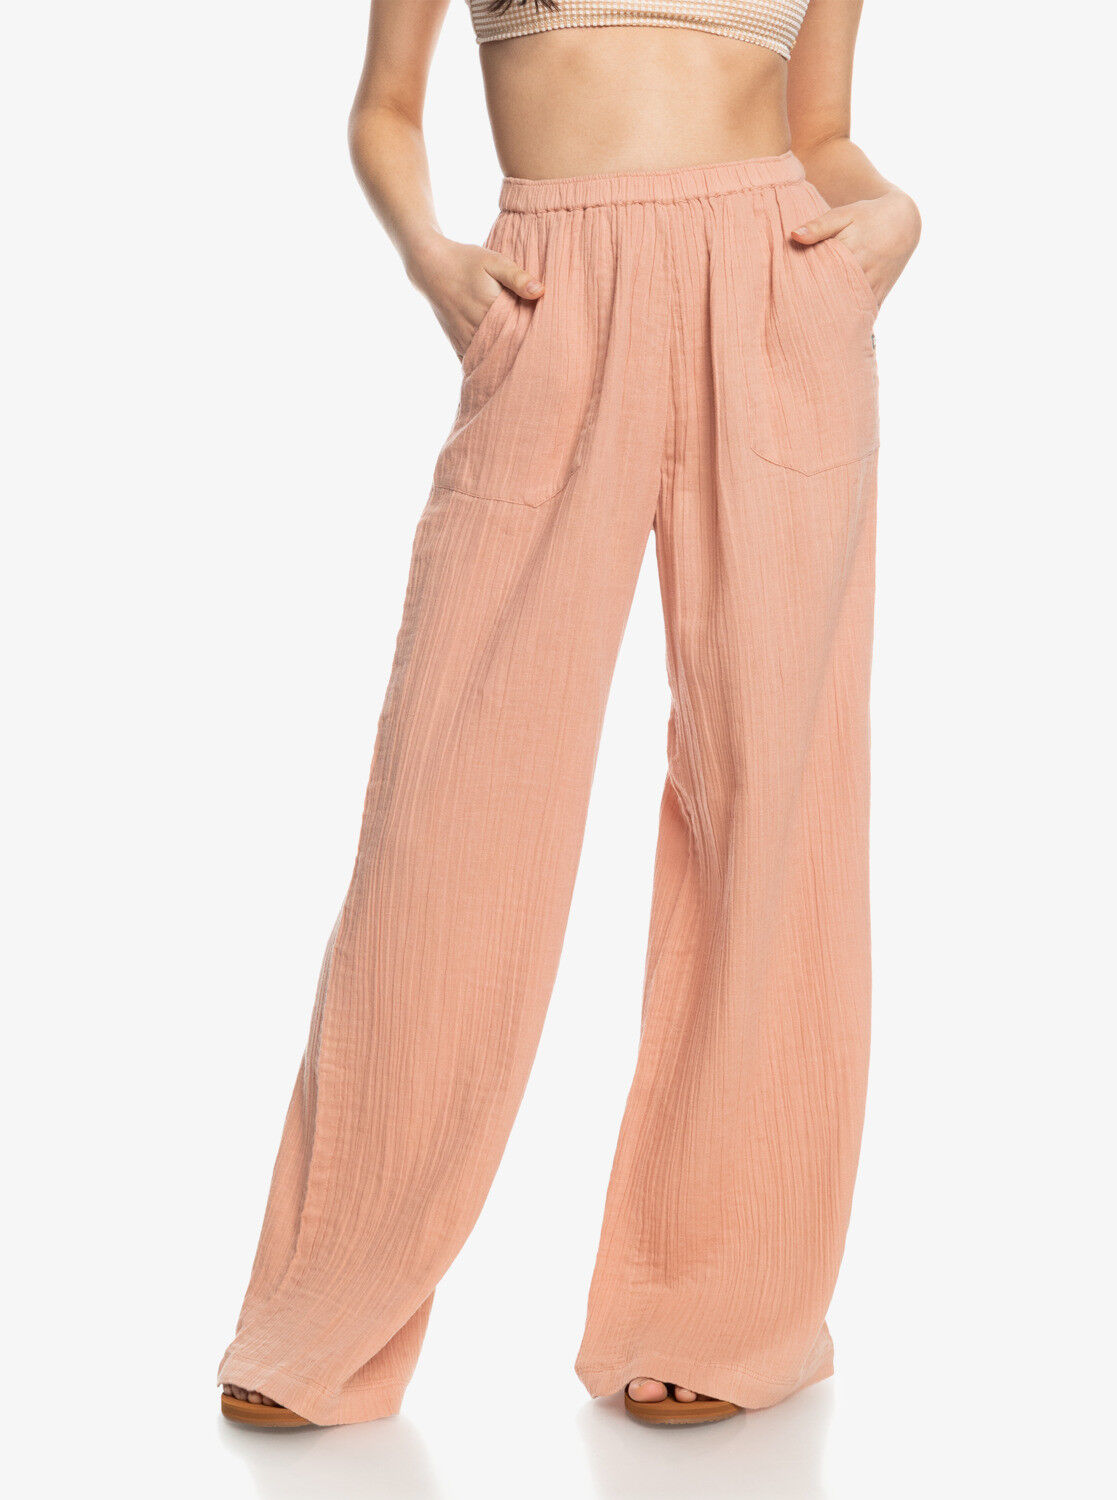 Roxy What A Vibe - Trousers - Women's | Hardloop